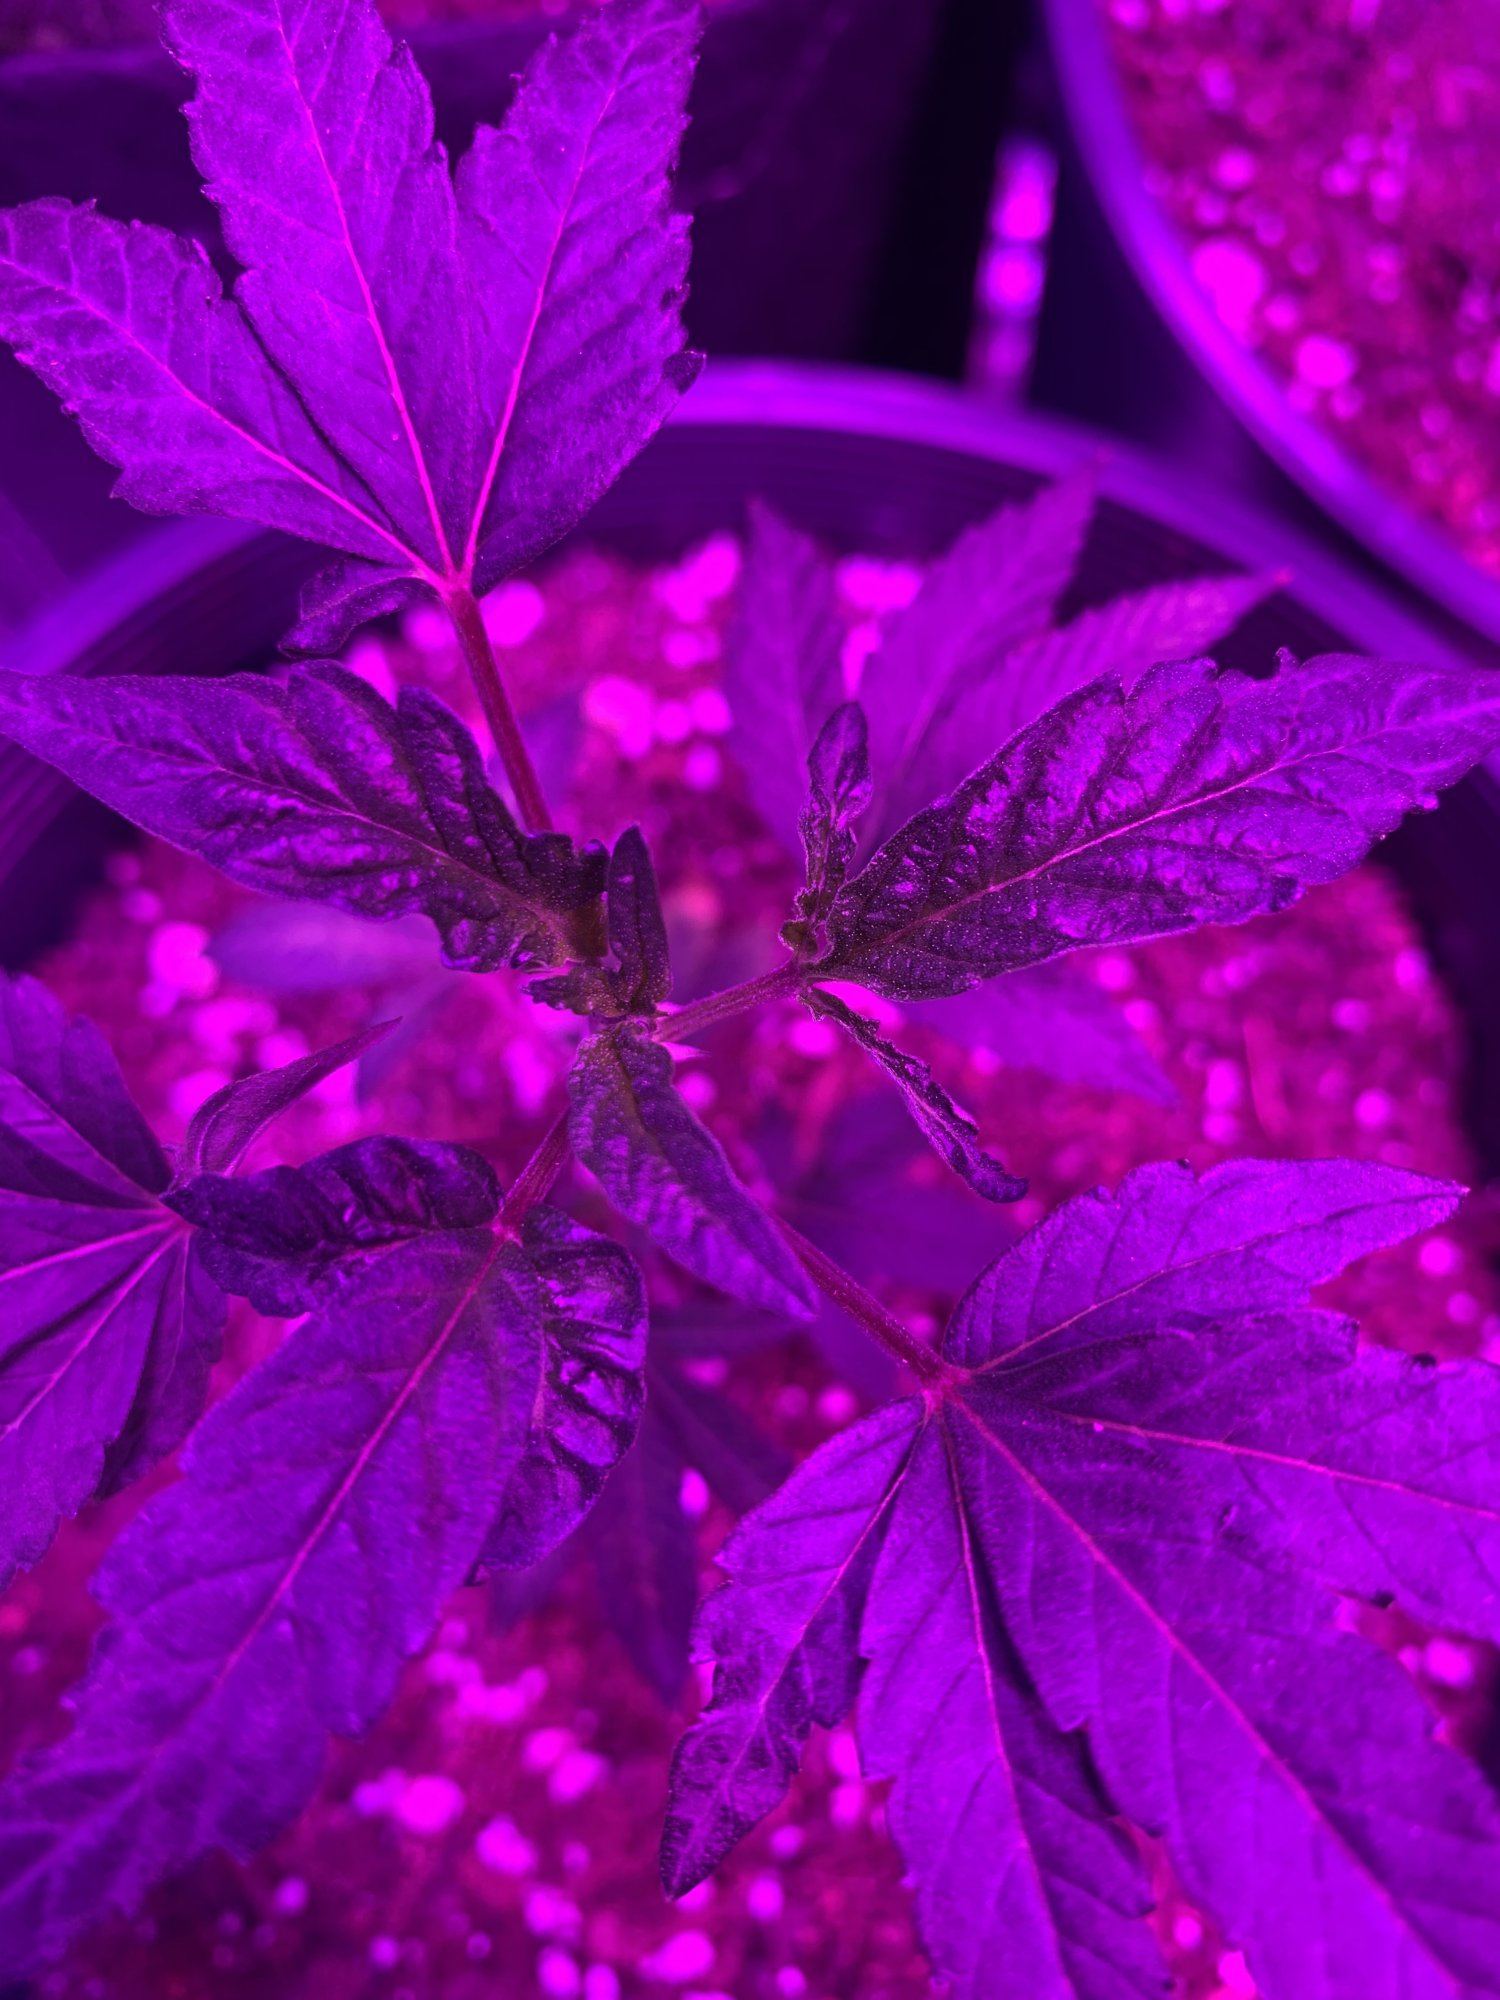 Clones new growth is twisted and very shiny